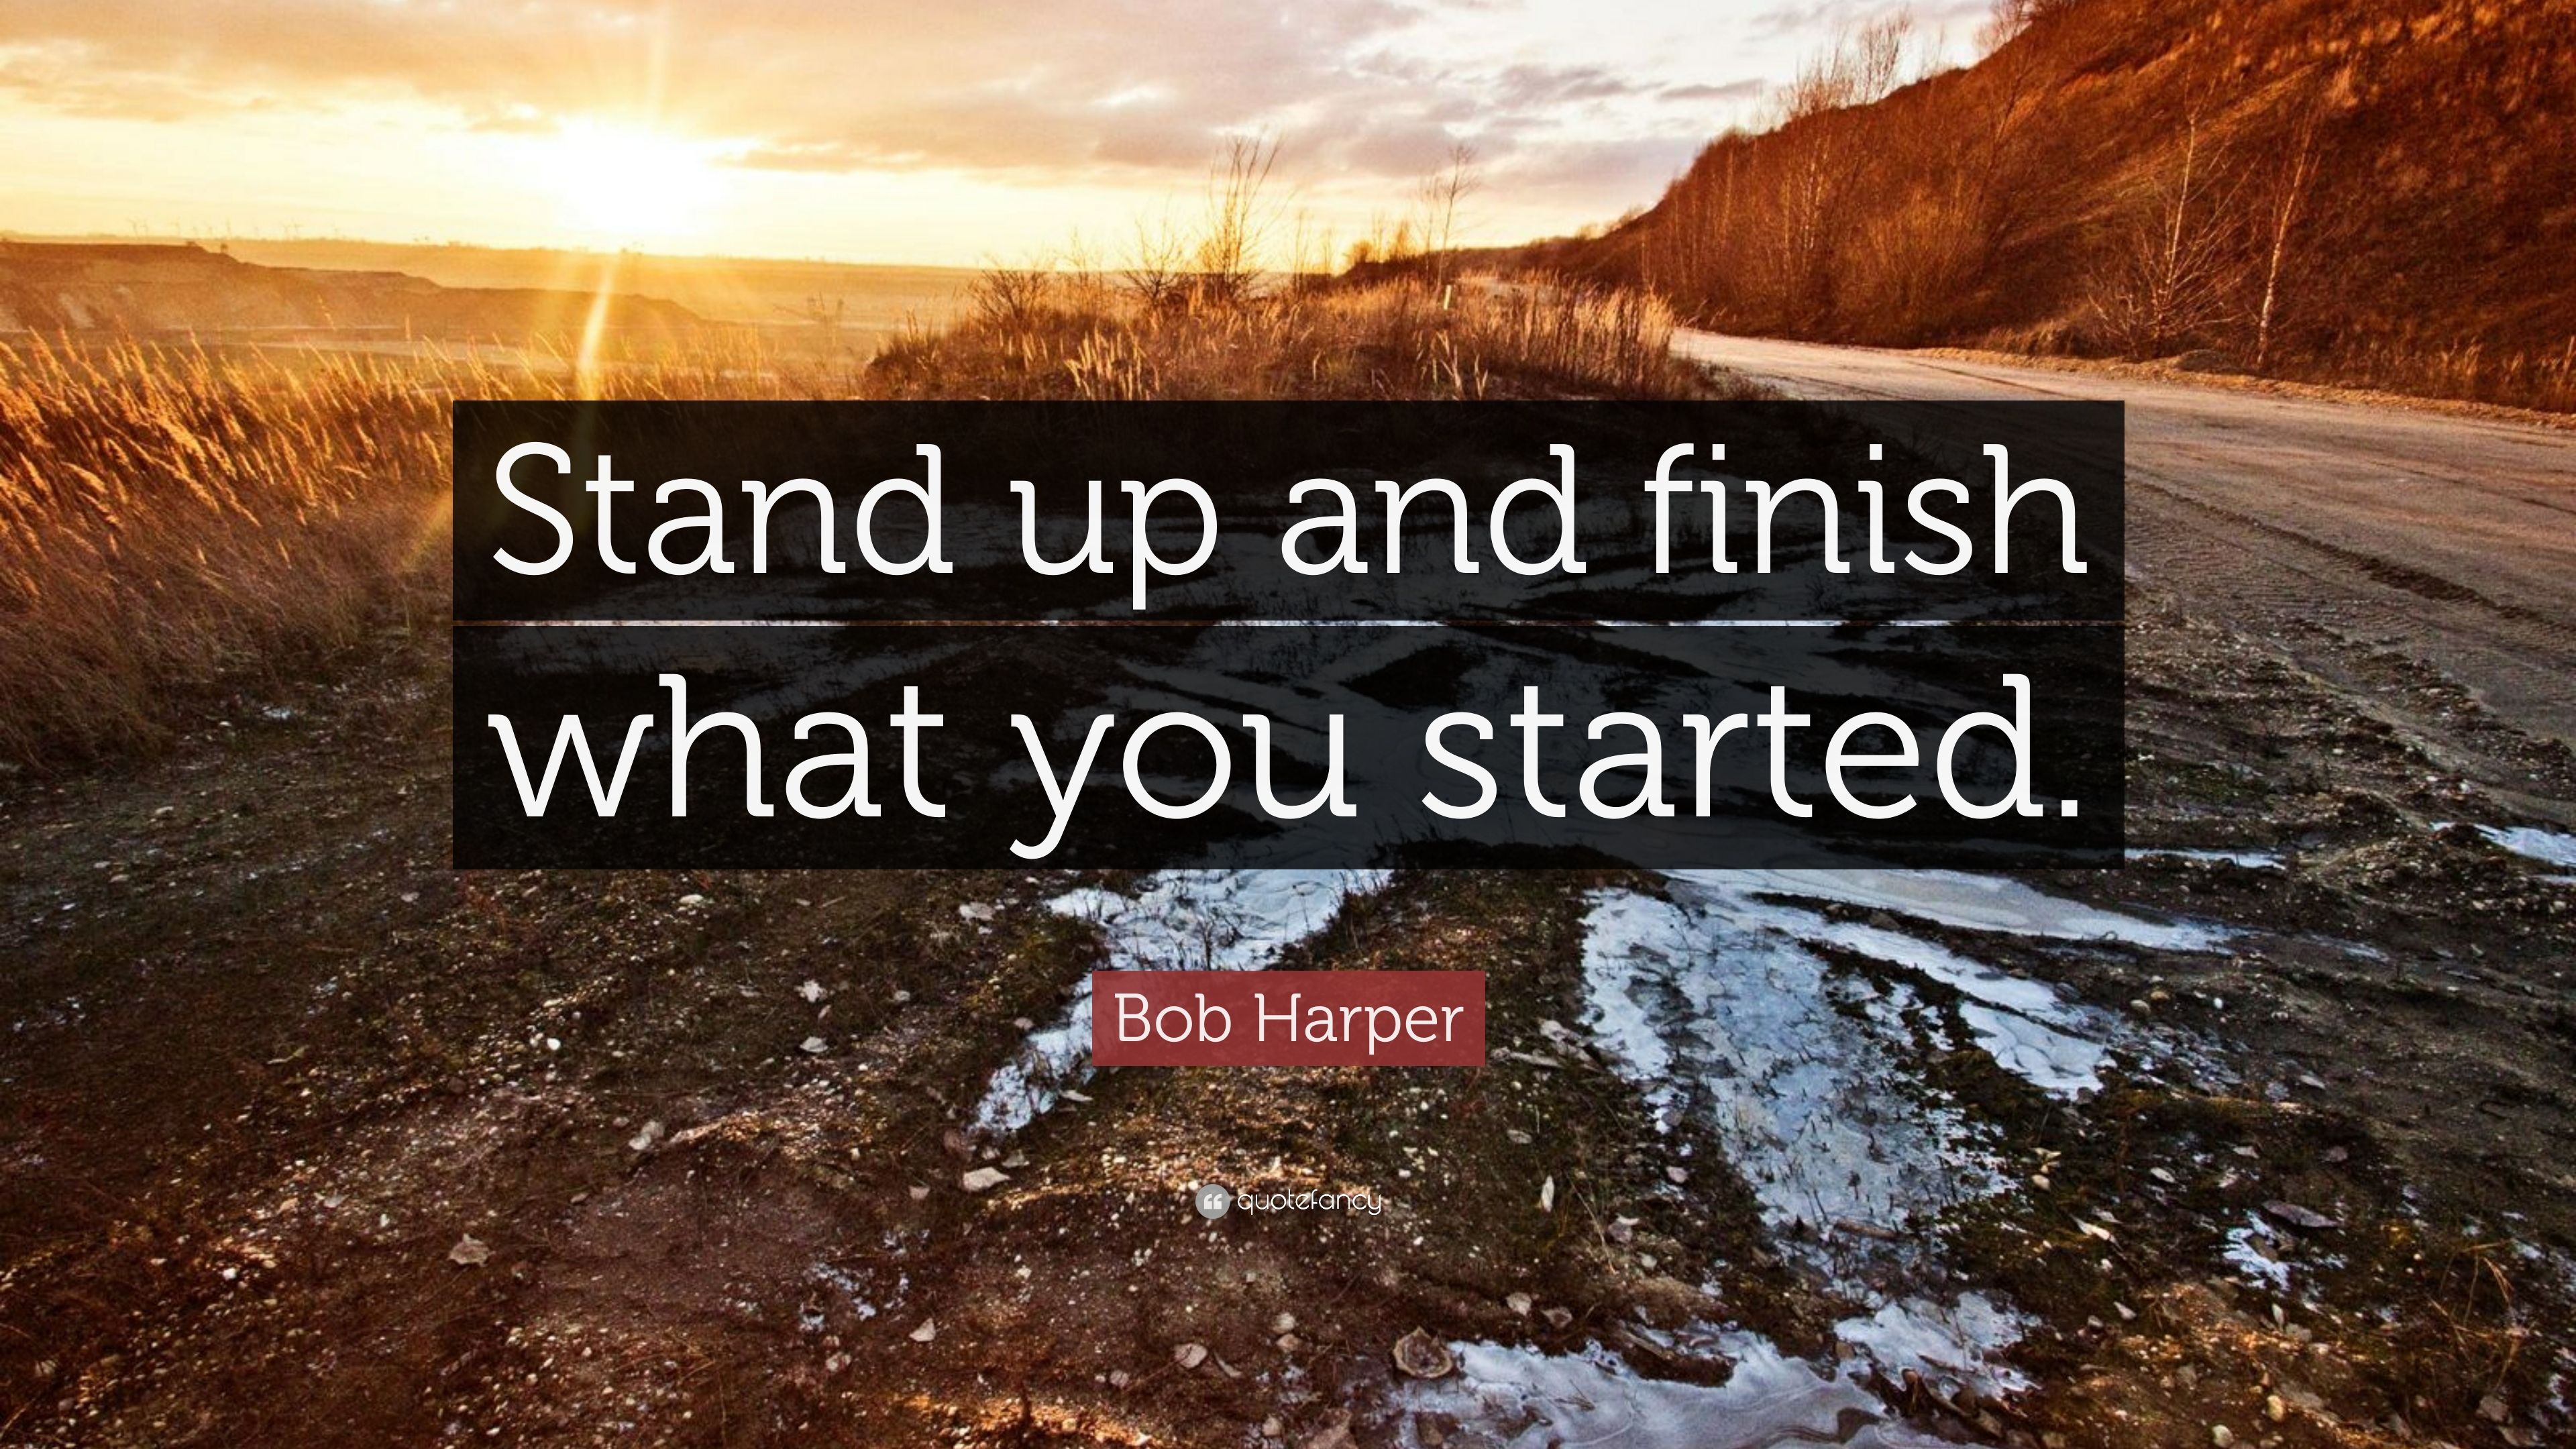 Bob Harper Quote: “Stand up and finish what you started.” (7 wallpaper)